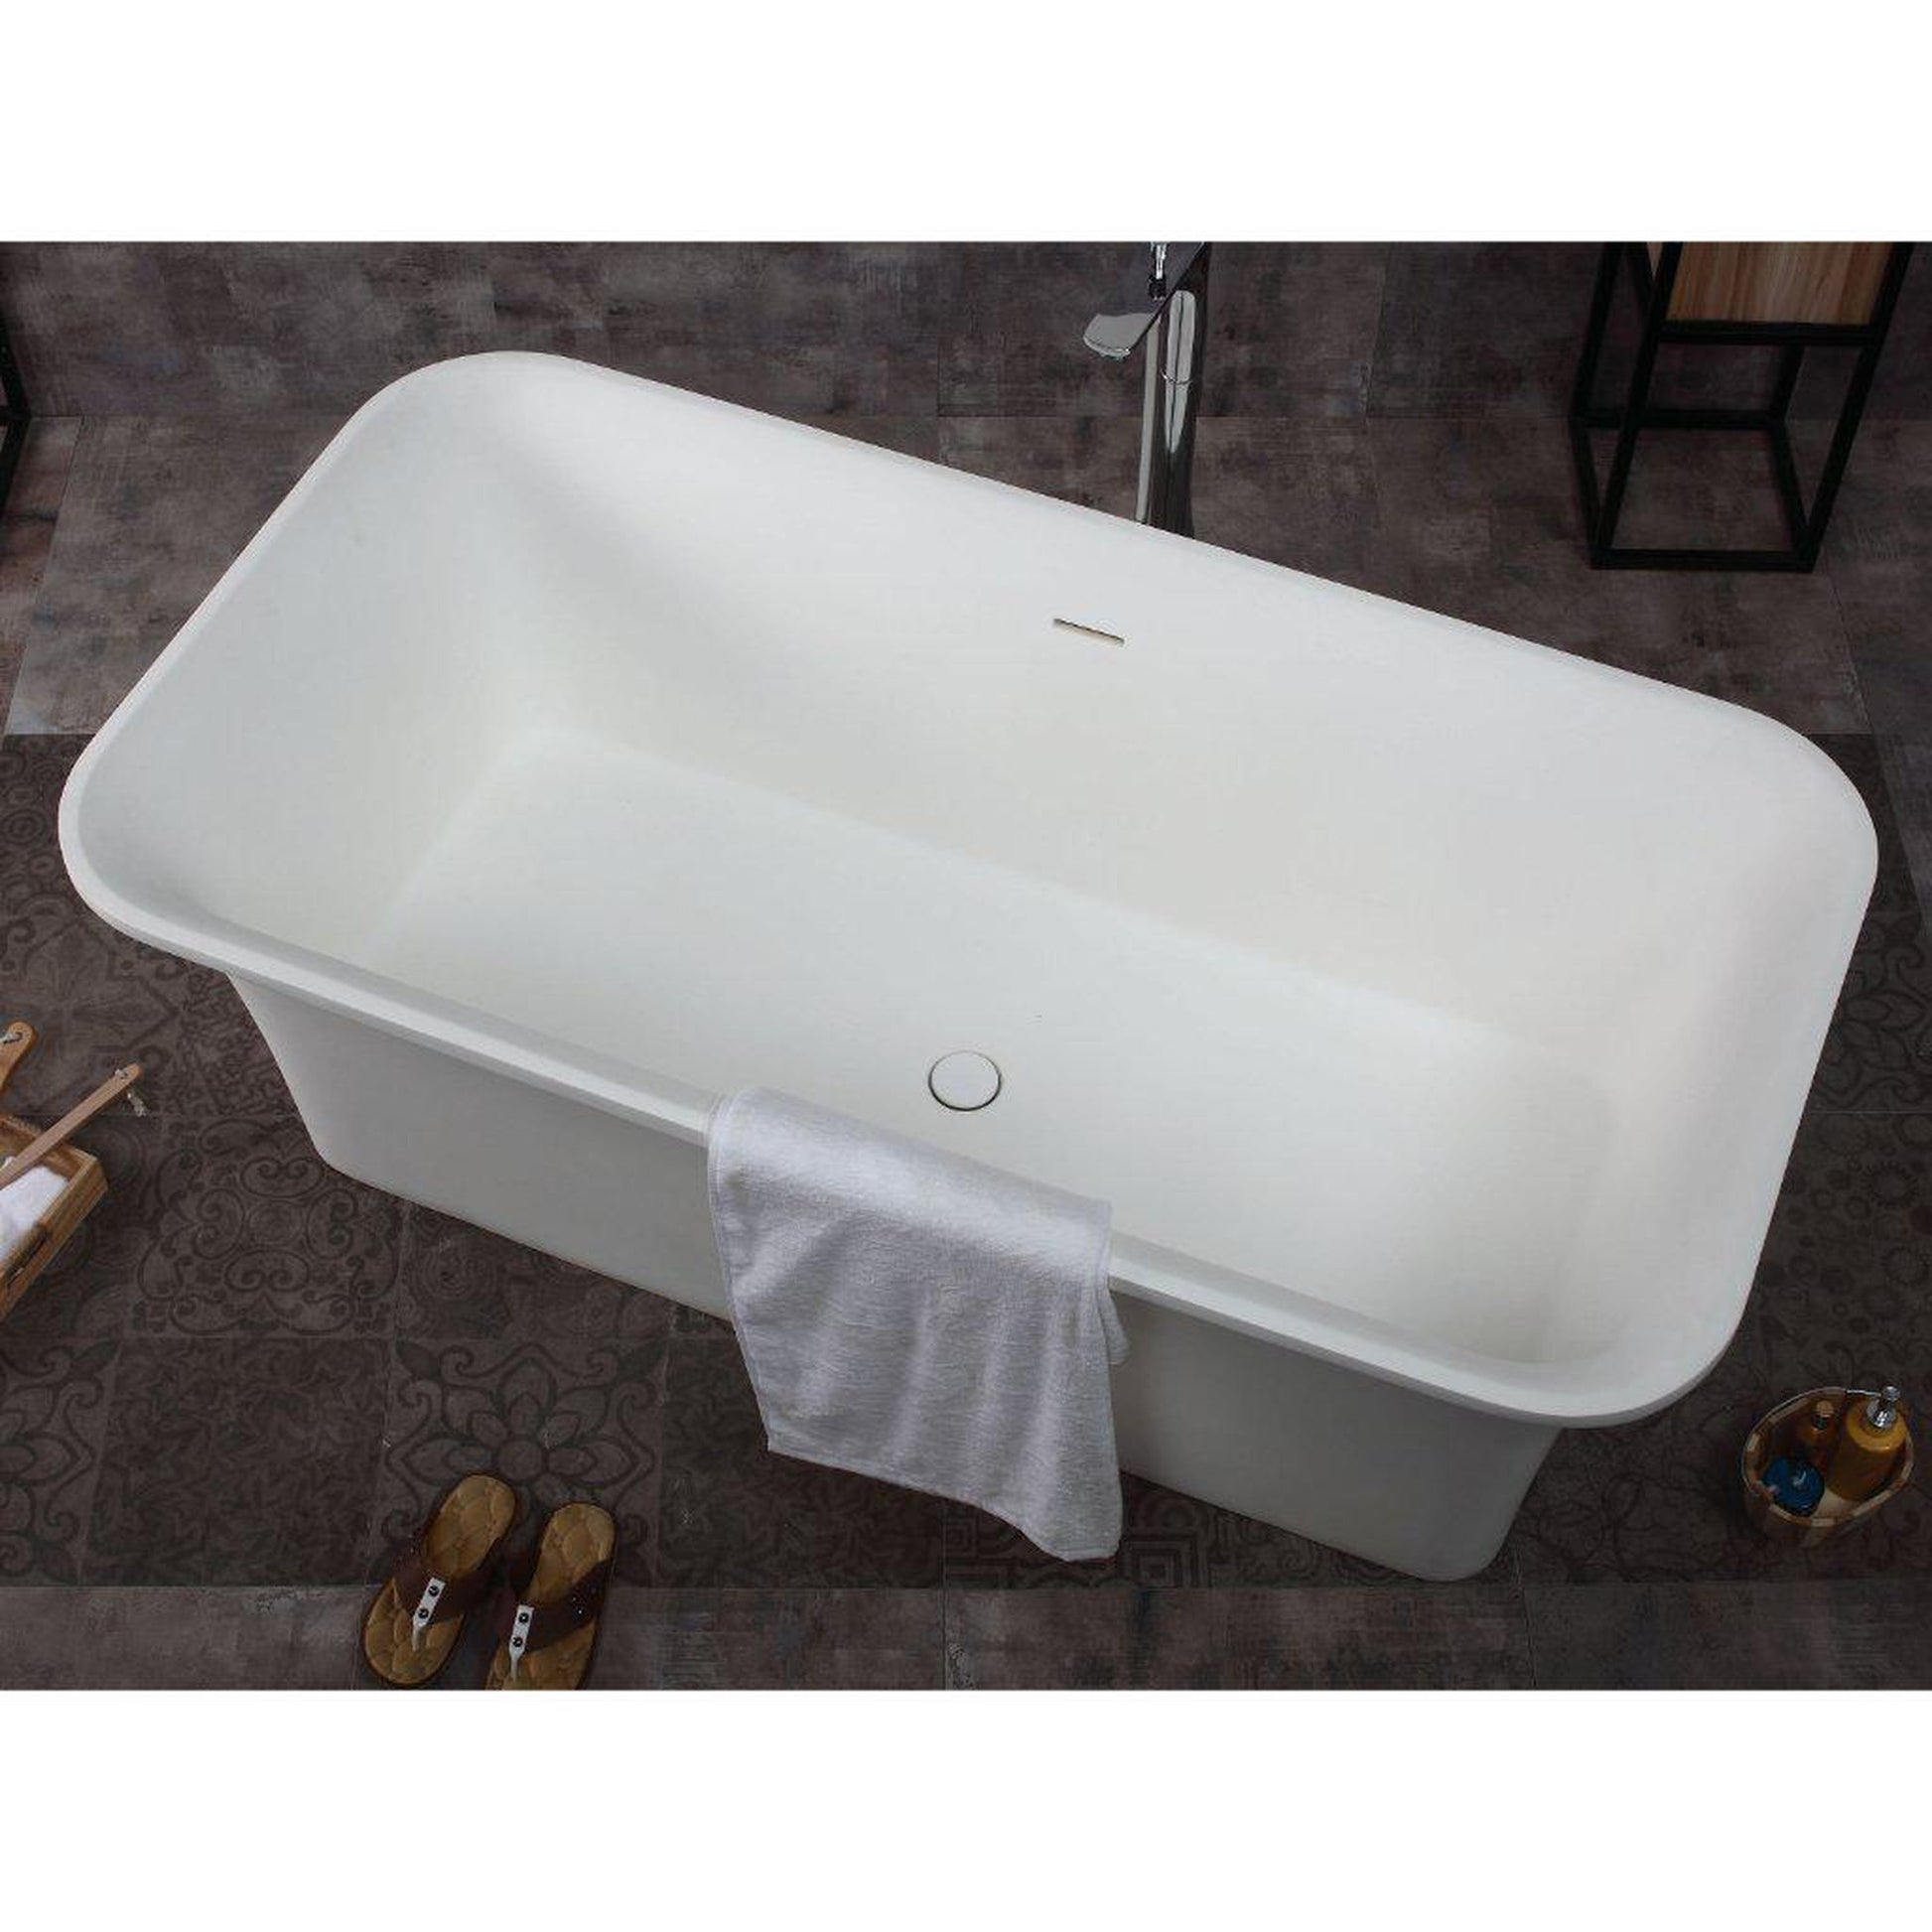 ALFI Brand AB9942 67" One Person Freestanding White Rectangle Solid Surface Smooth Resin Soaking Bathtub